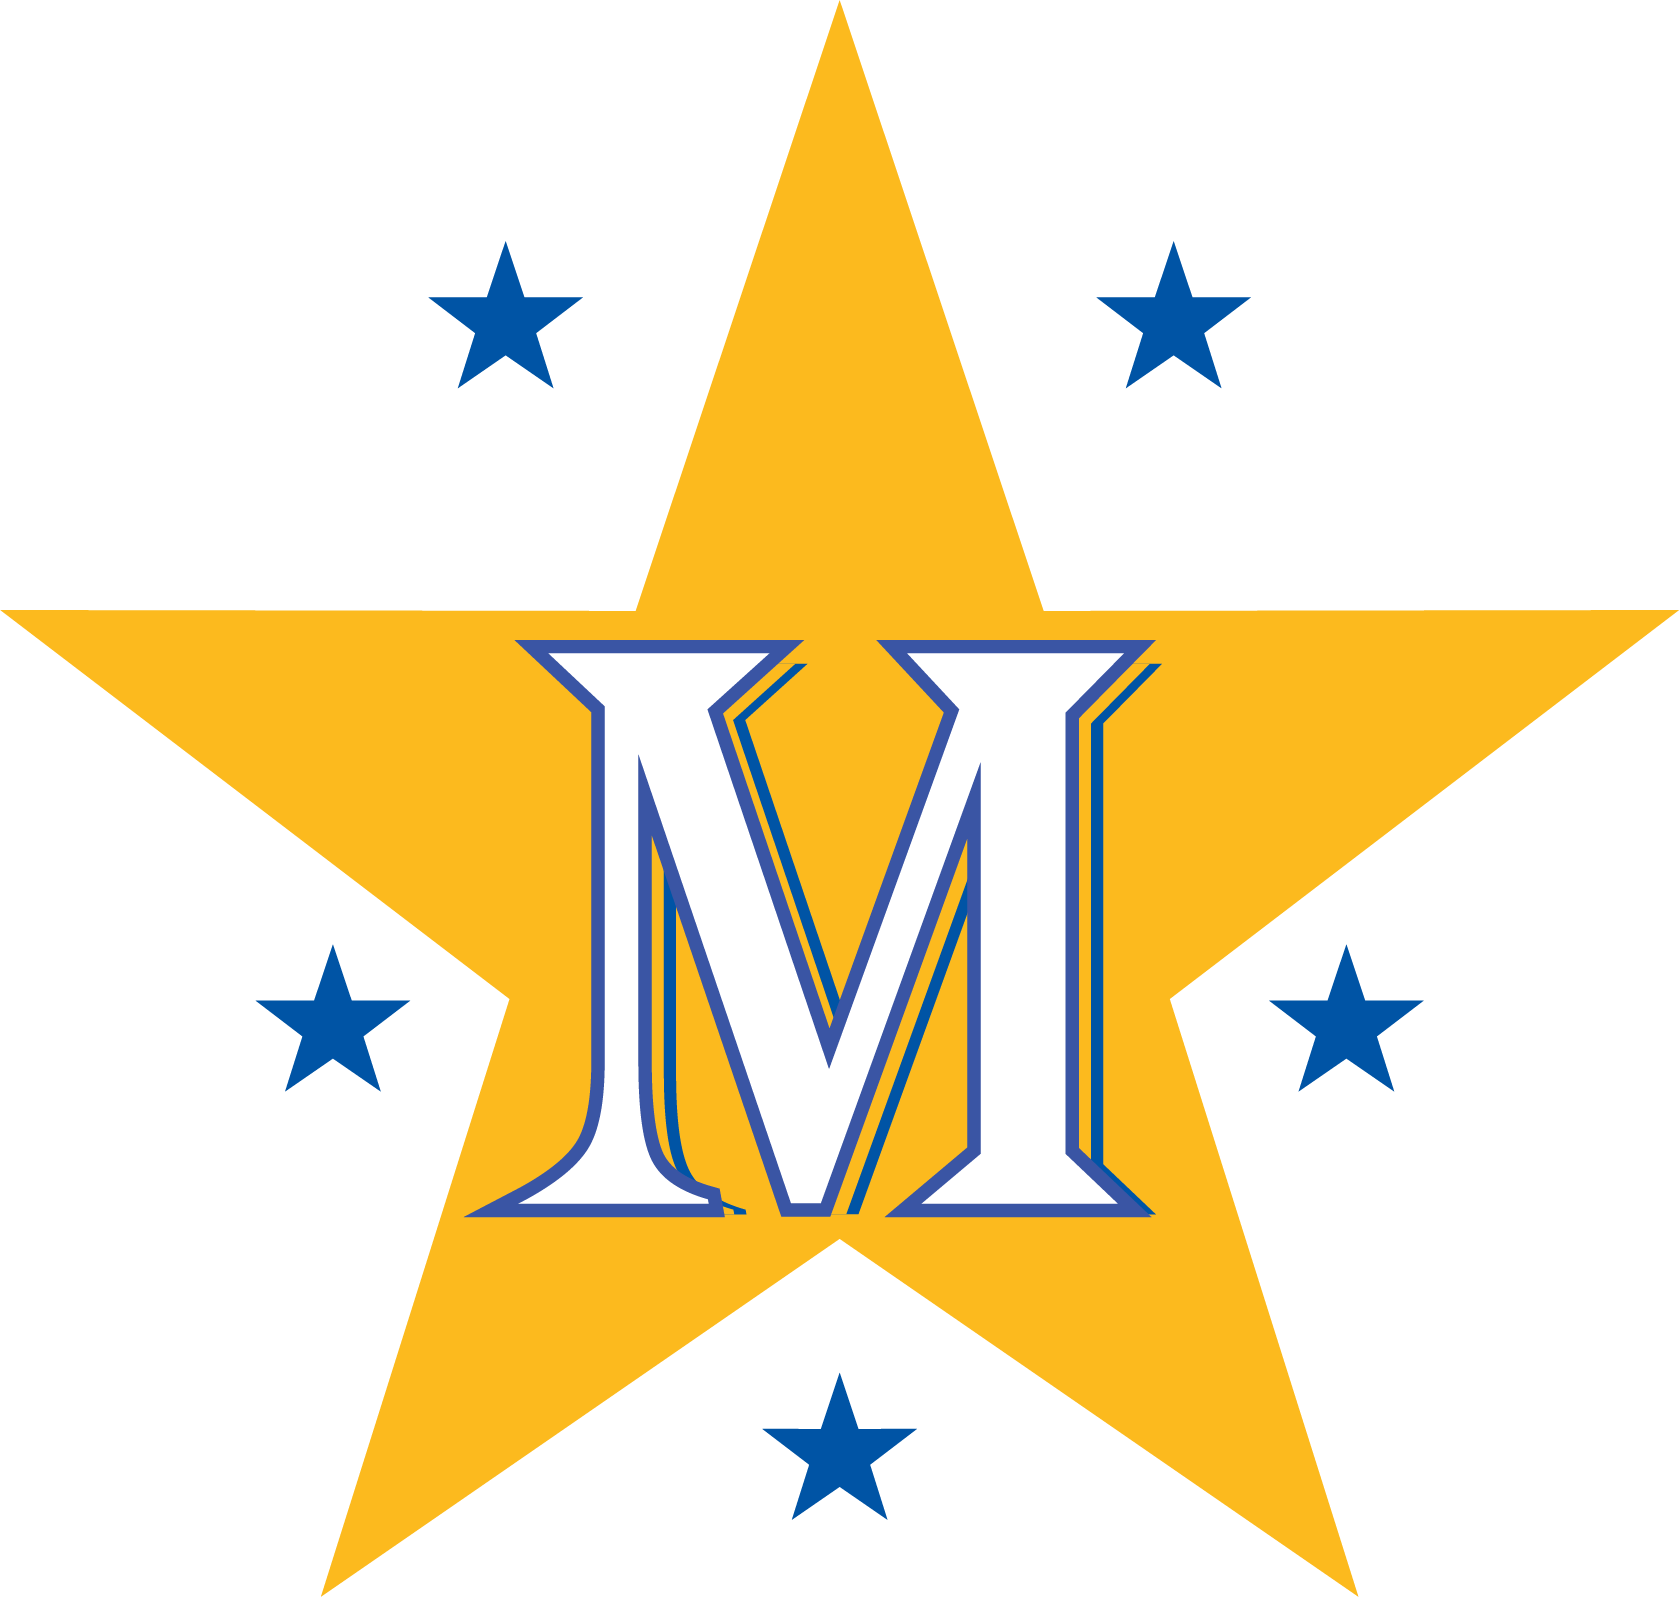 Maryvale Logo